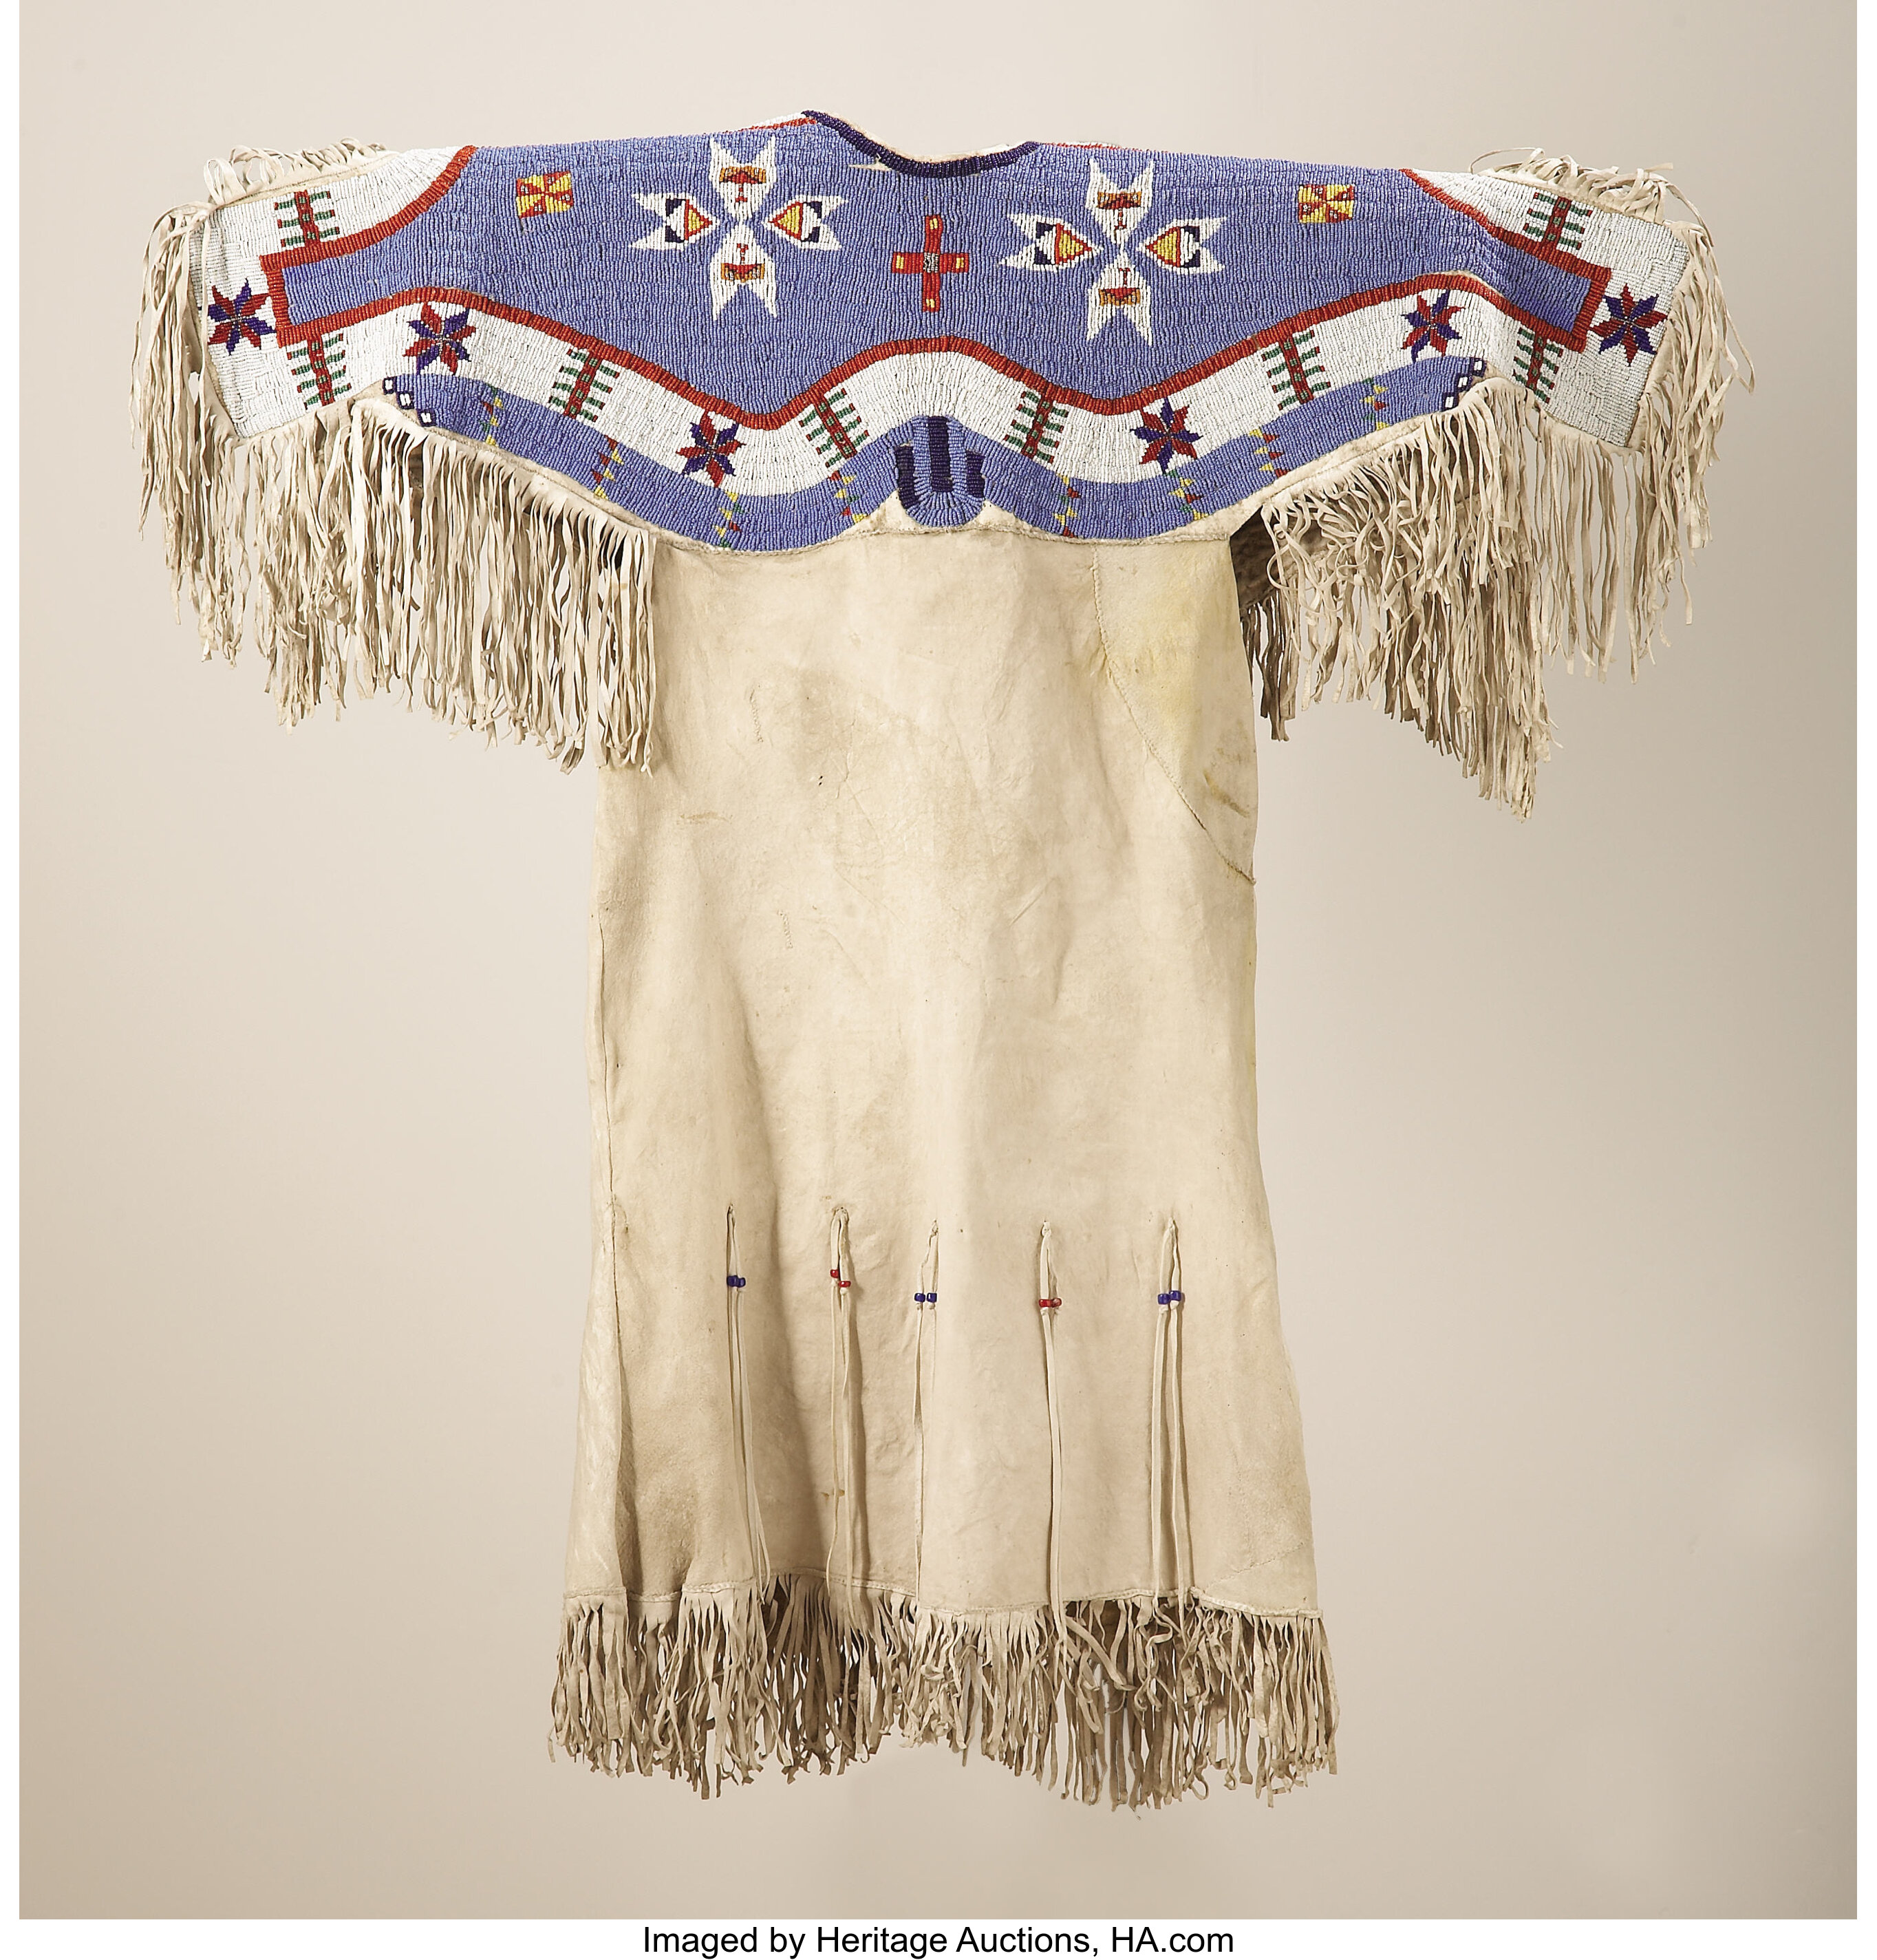 A SIOUX BEADED HIDE GIRL'S DRESS. c. 1900... Paintings | Lot #74120 ...